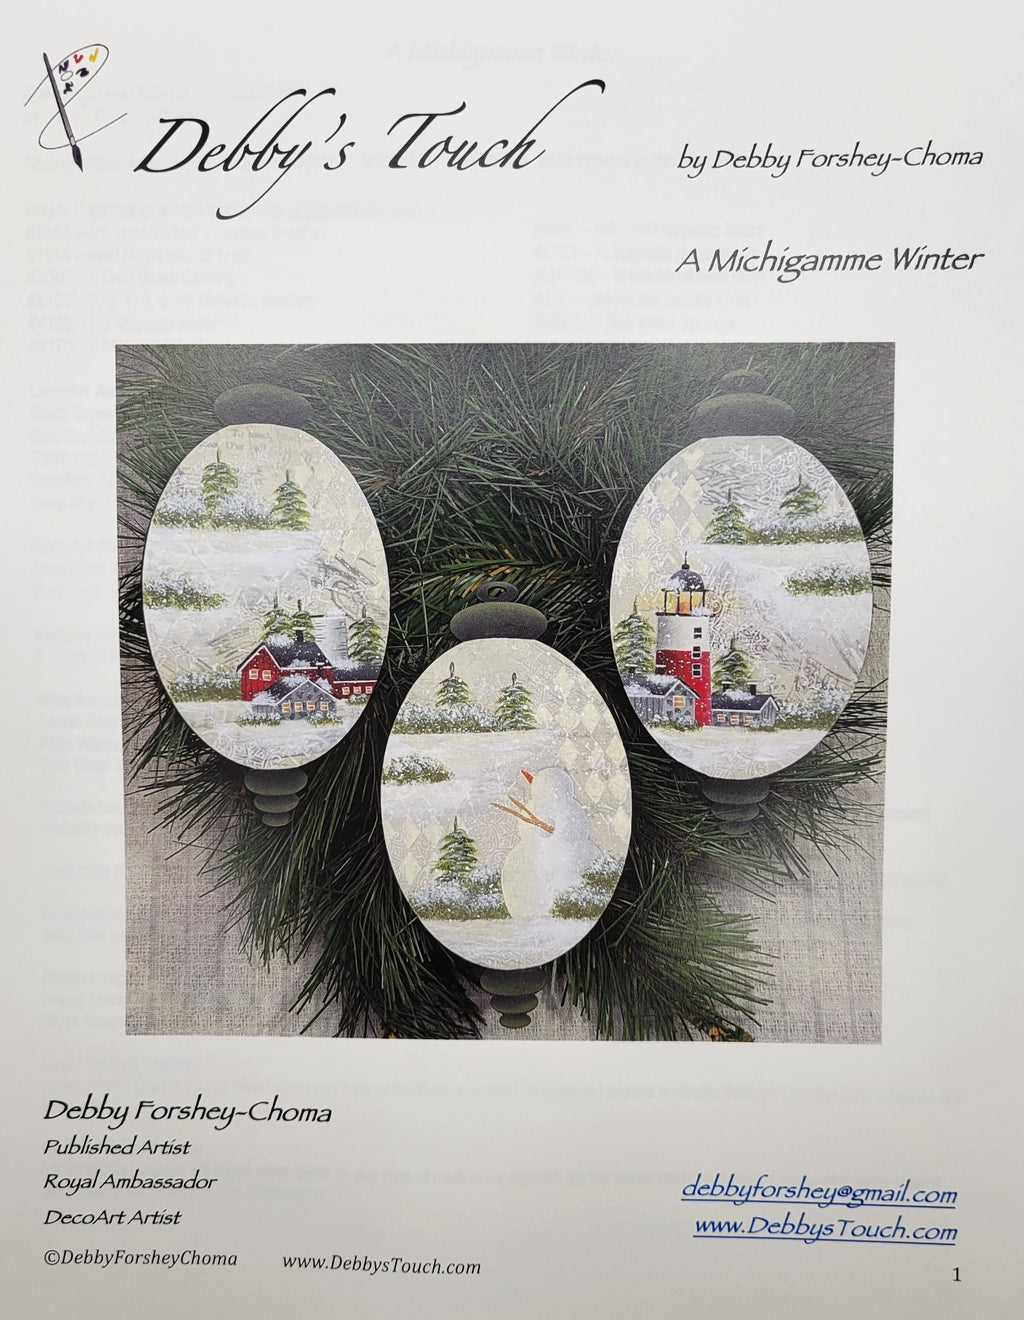 A Michigamme Winter Packet by Debby Forshey-Choma